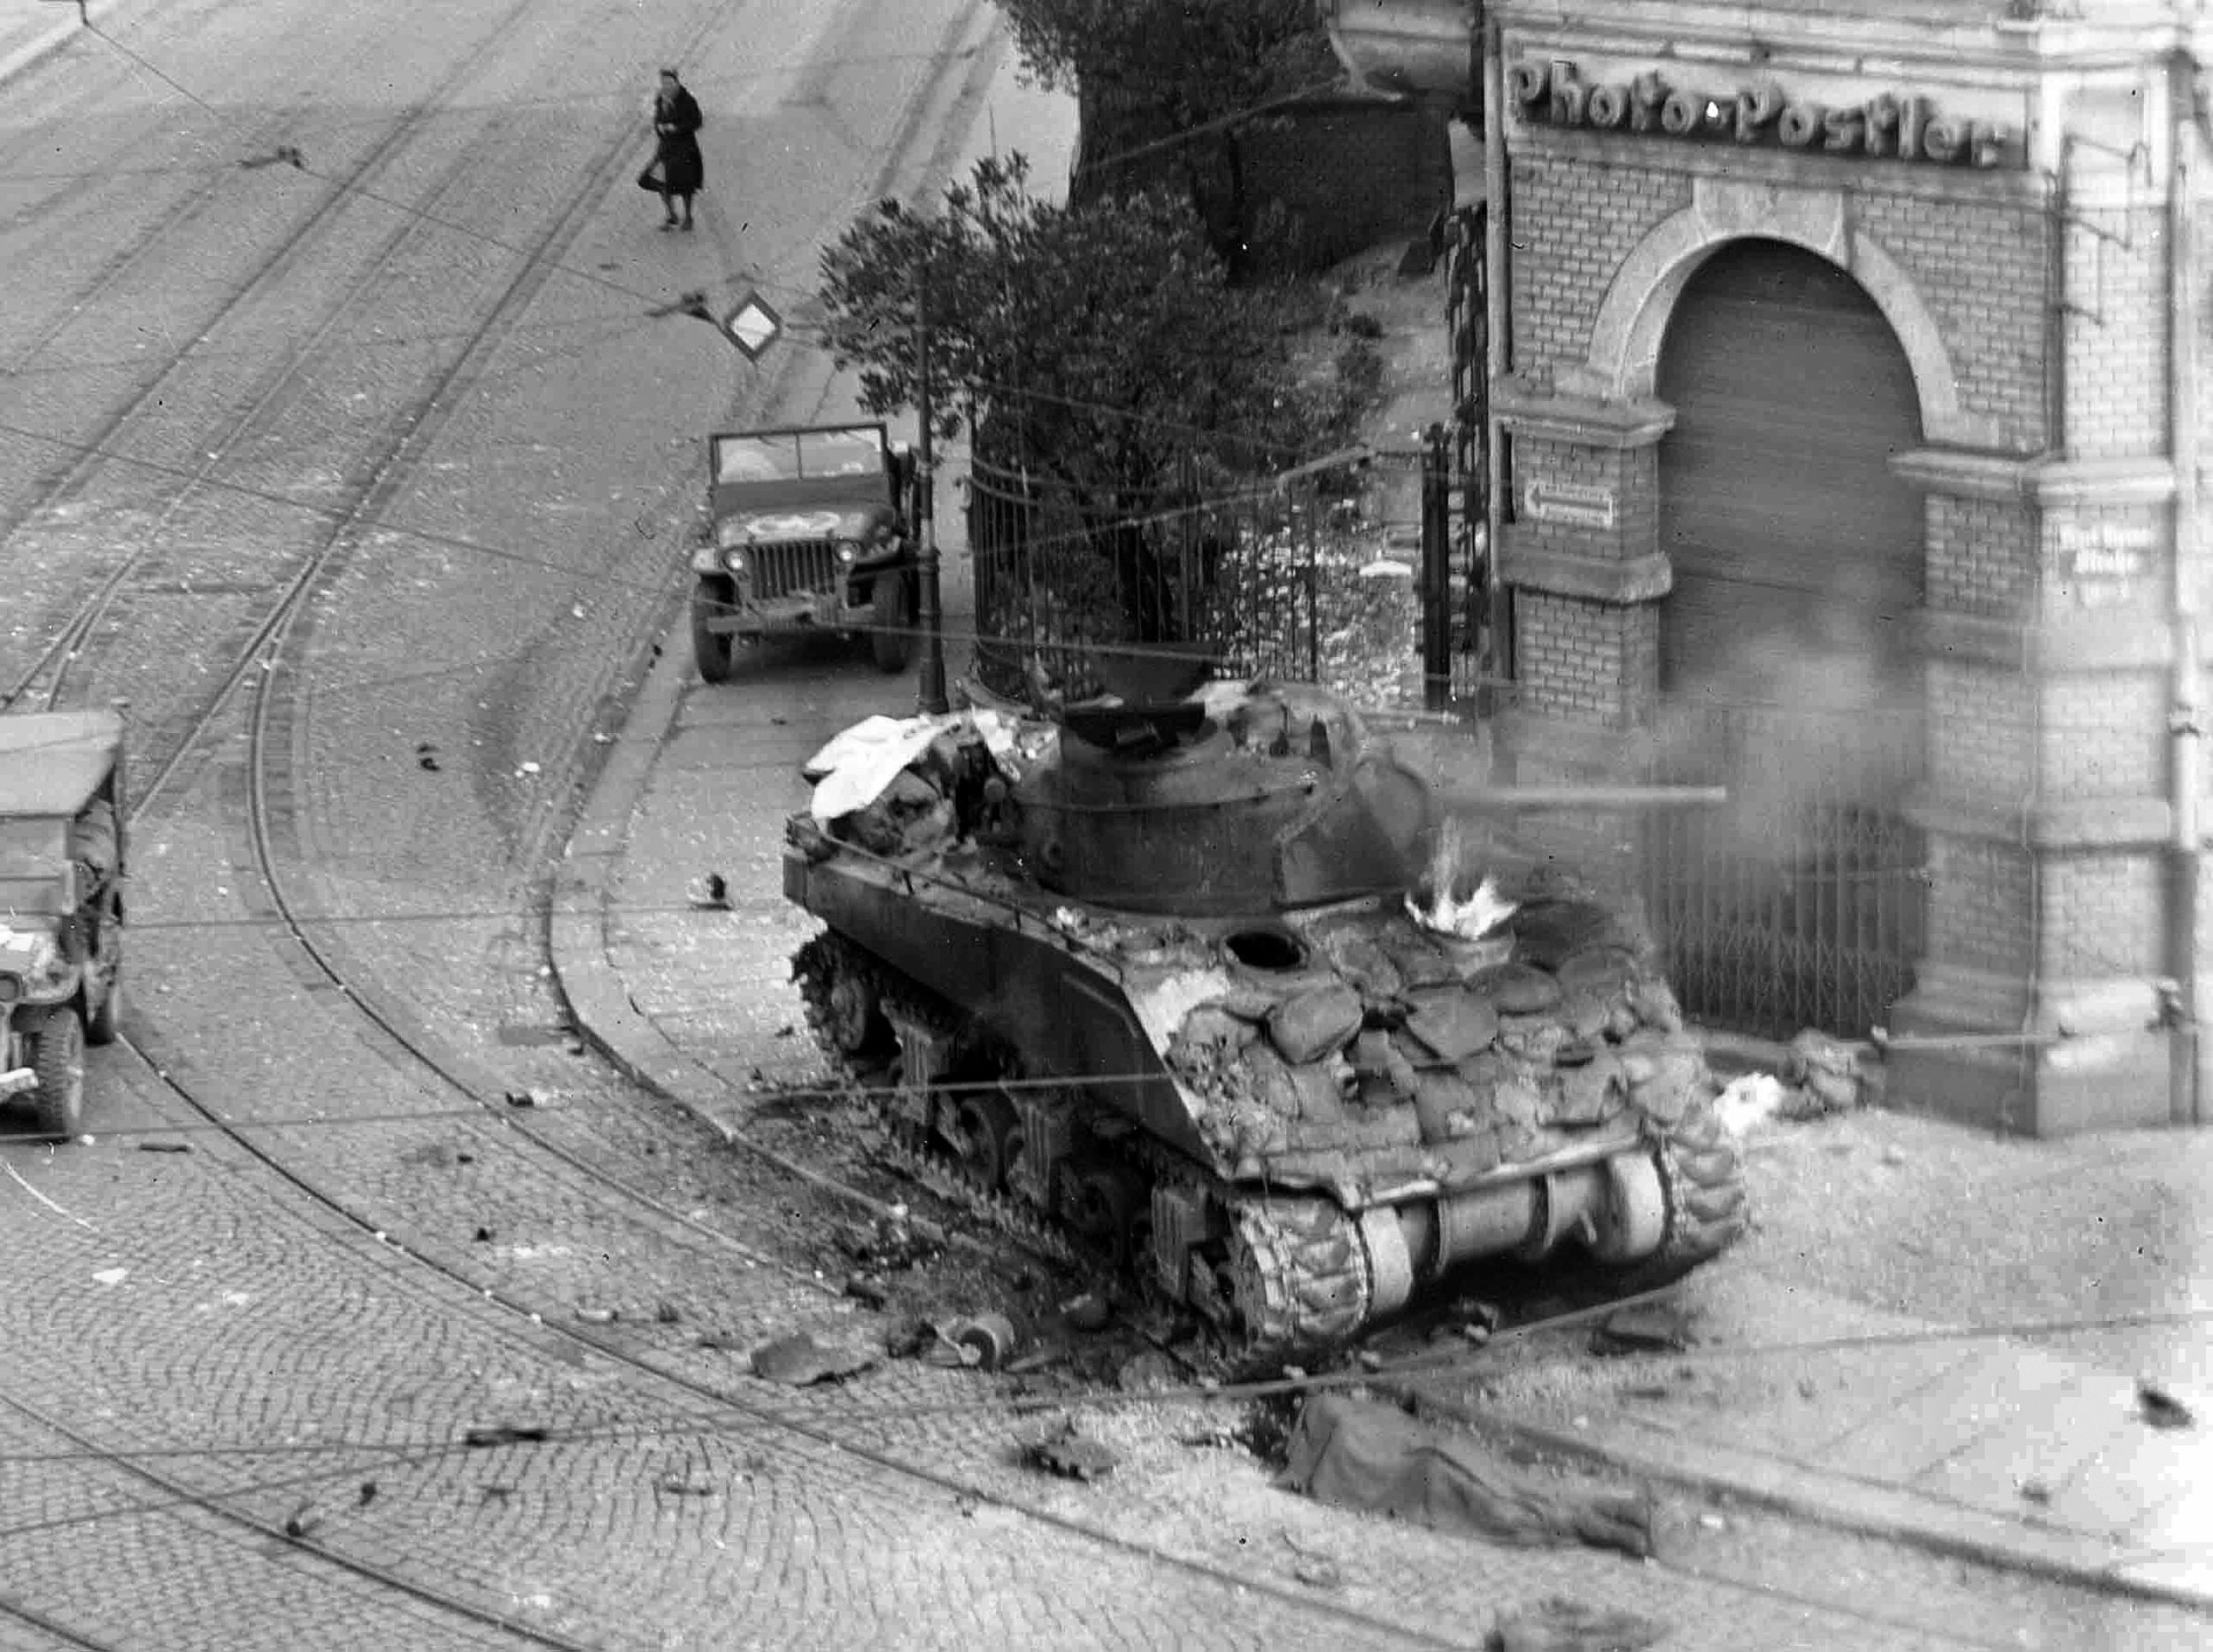 A German panzerfaust anti-tank weapon, operated by Hitler Youth members, has knocked out this Sherman tank and set it ablaze in the center of Leipzig, Germany, April 1945. The hit devastated the crew inside and created a pyschologically difficult job for the maintenance personnel.